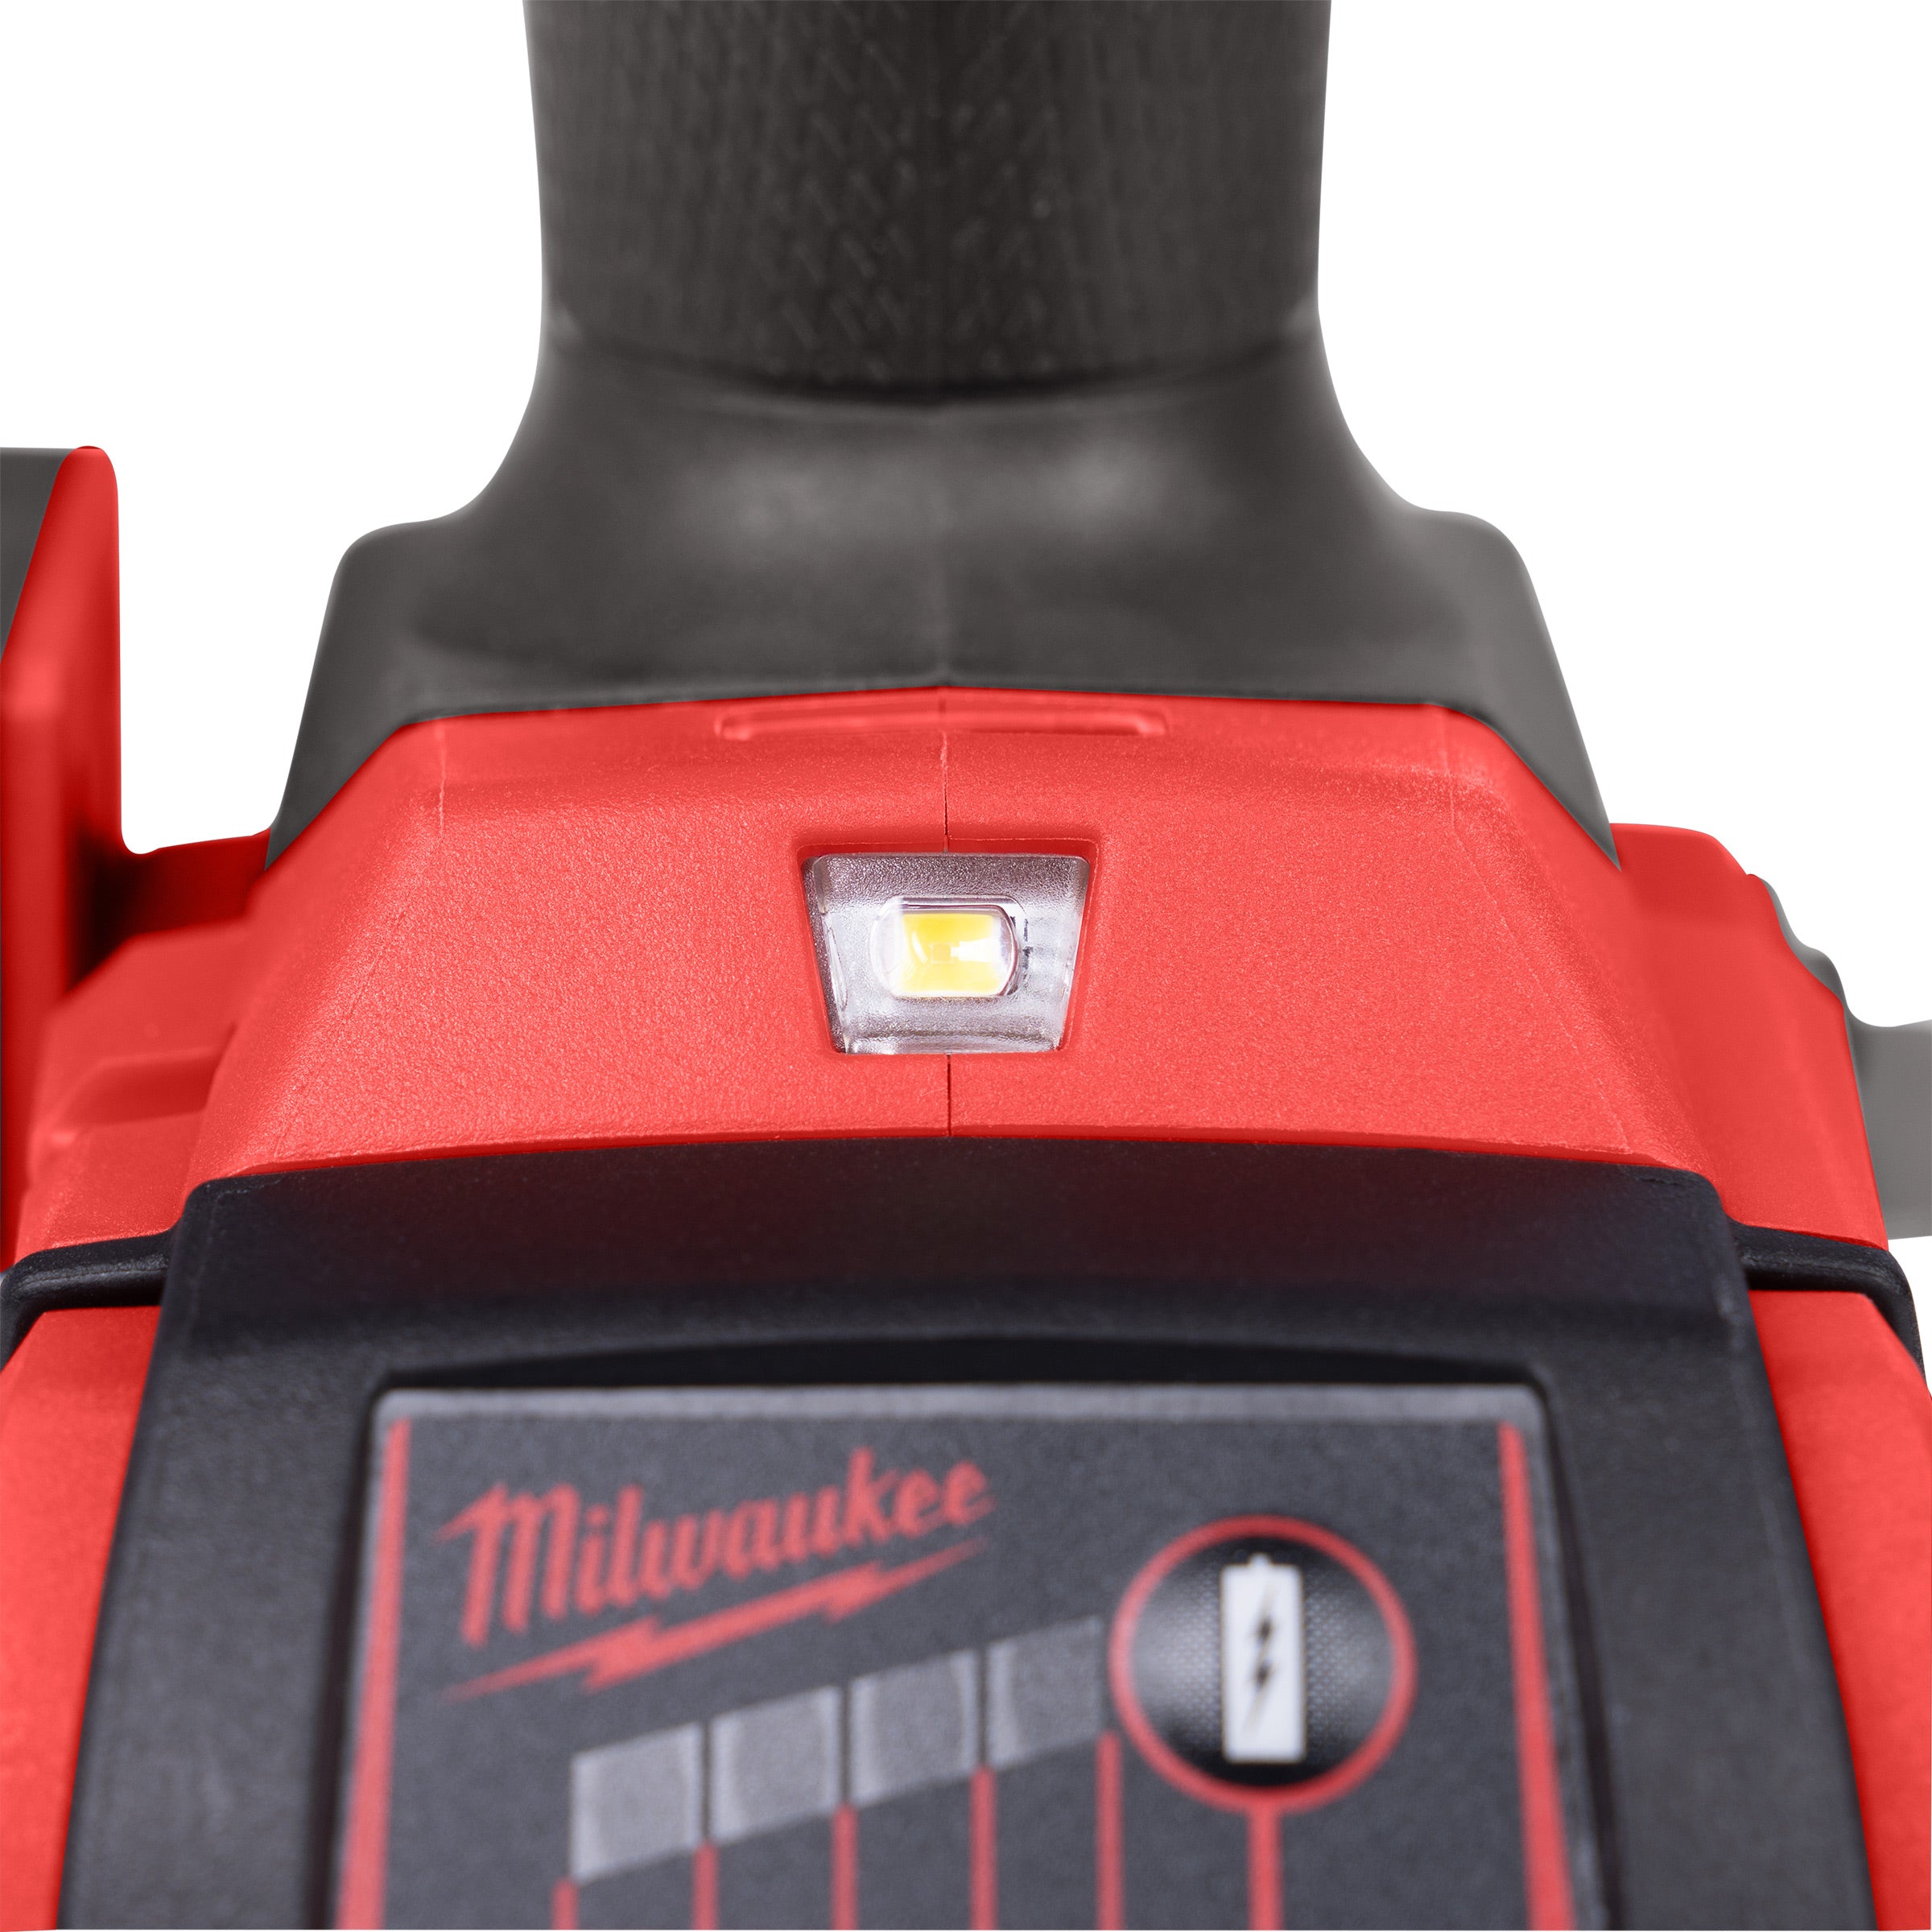 Milwaukee M18FPD3-0 18V Fuel Brushless Combi Drill Body Only